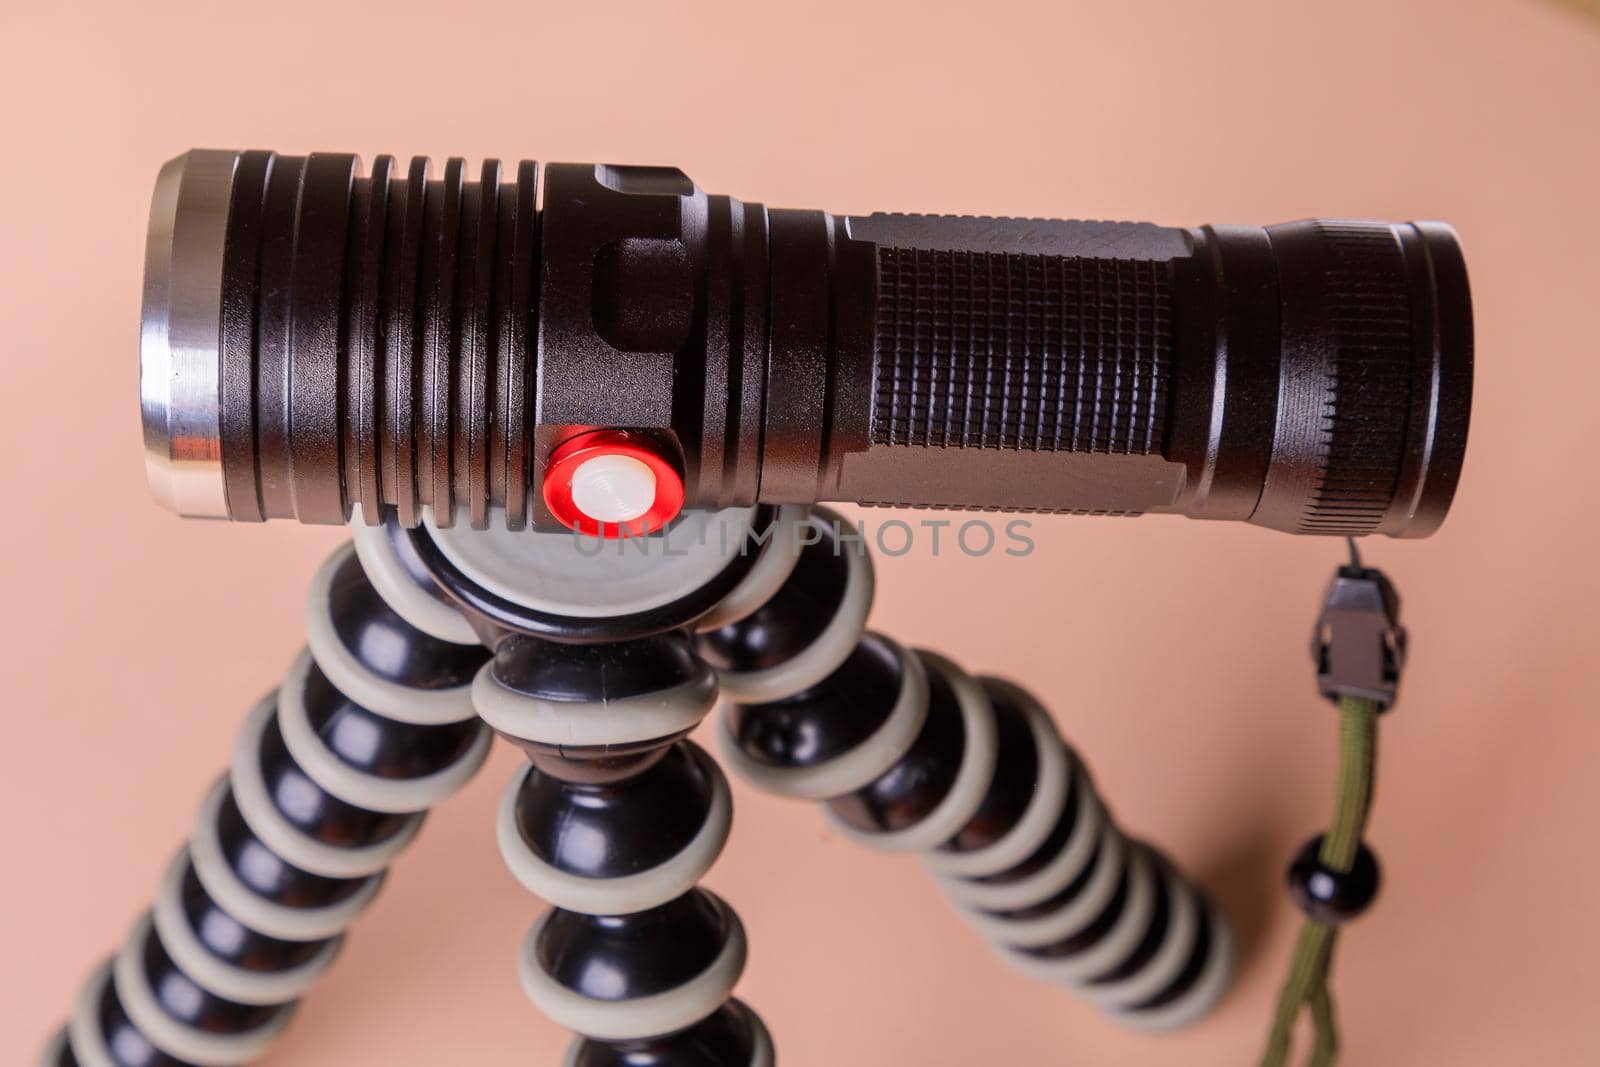 The light for the photographer is durable, powerful, made of aluminum. Flashlight on a pink background